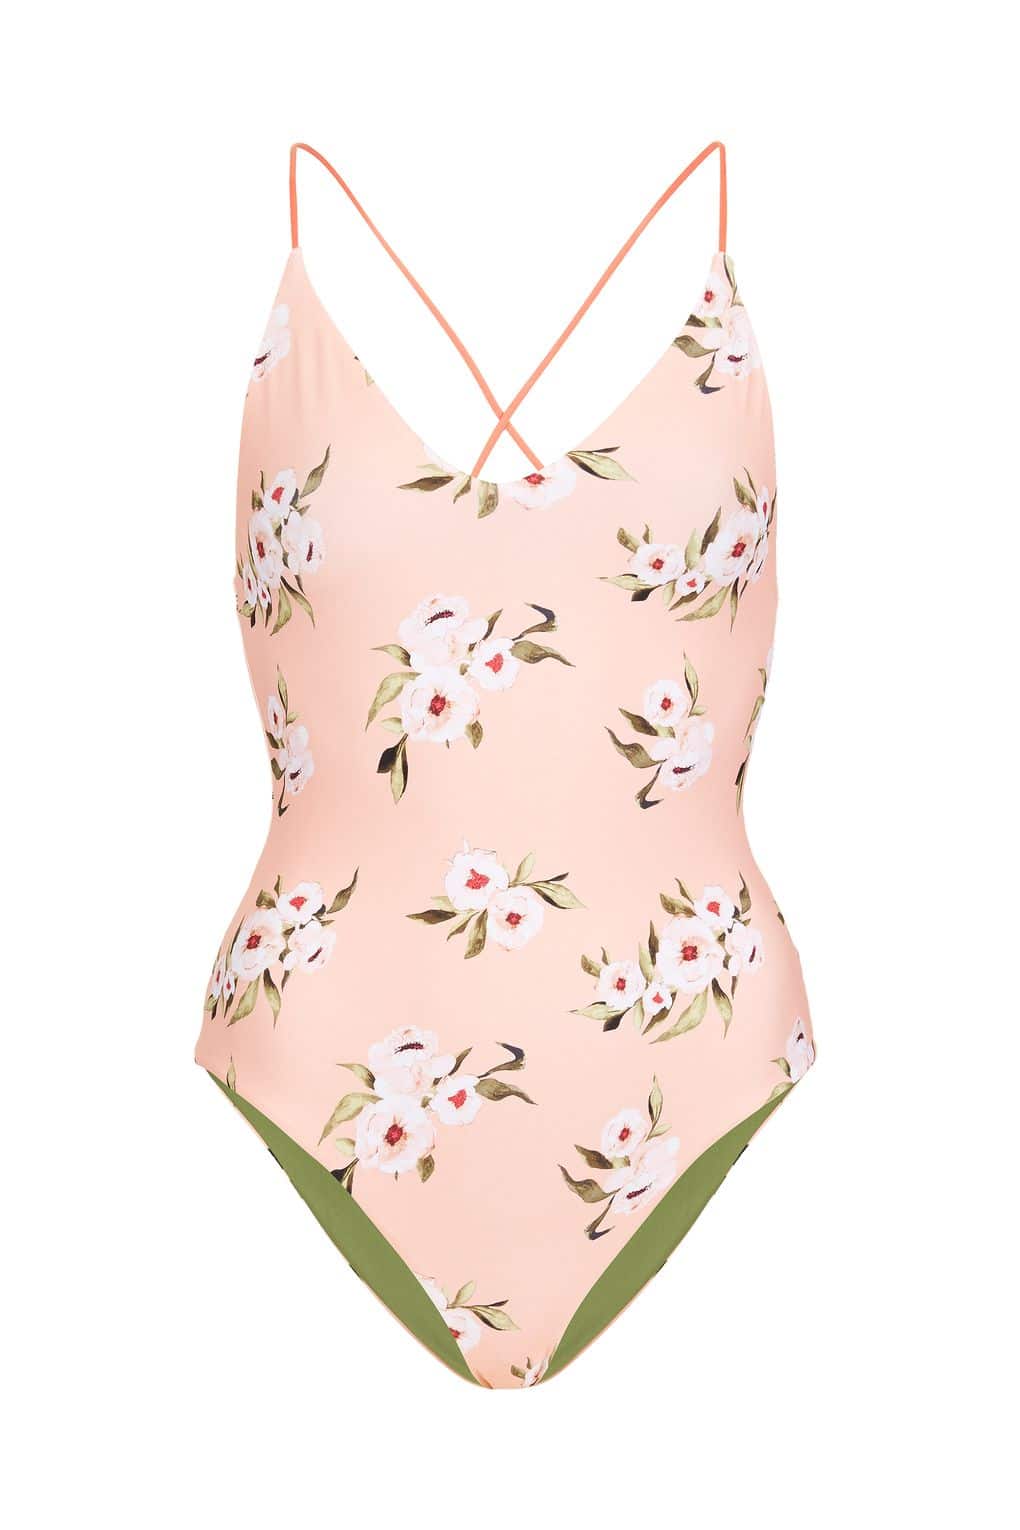 The Fashion Magpie Floral Swimsuit